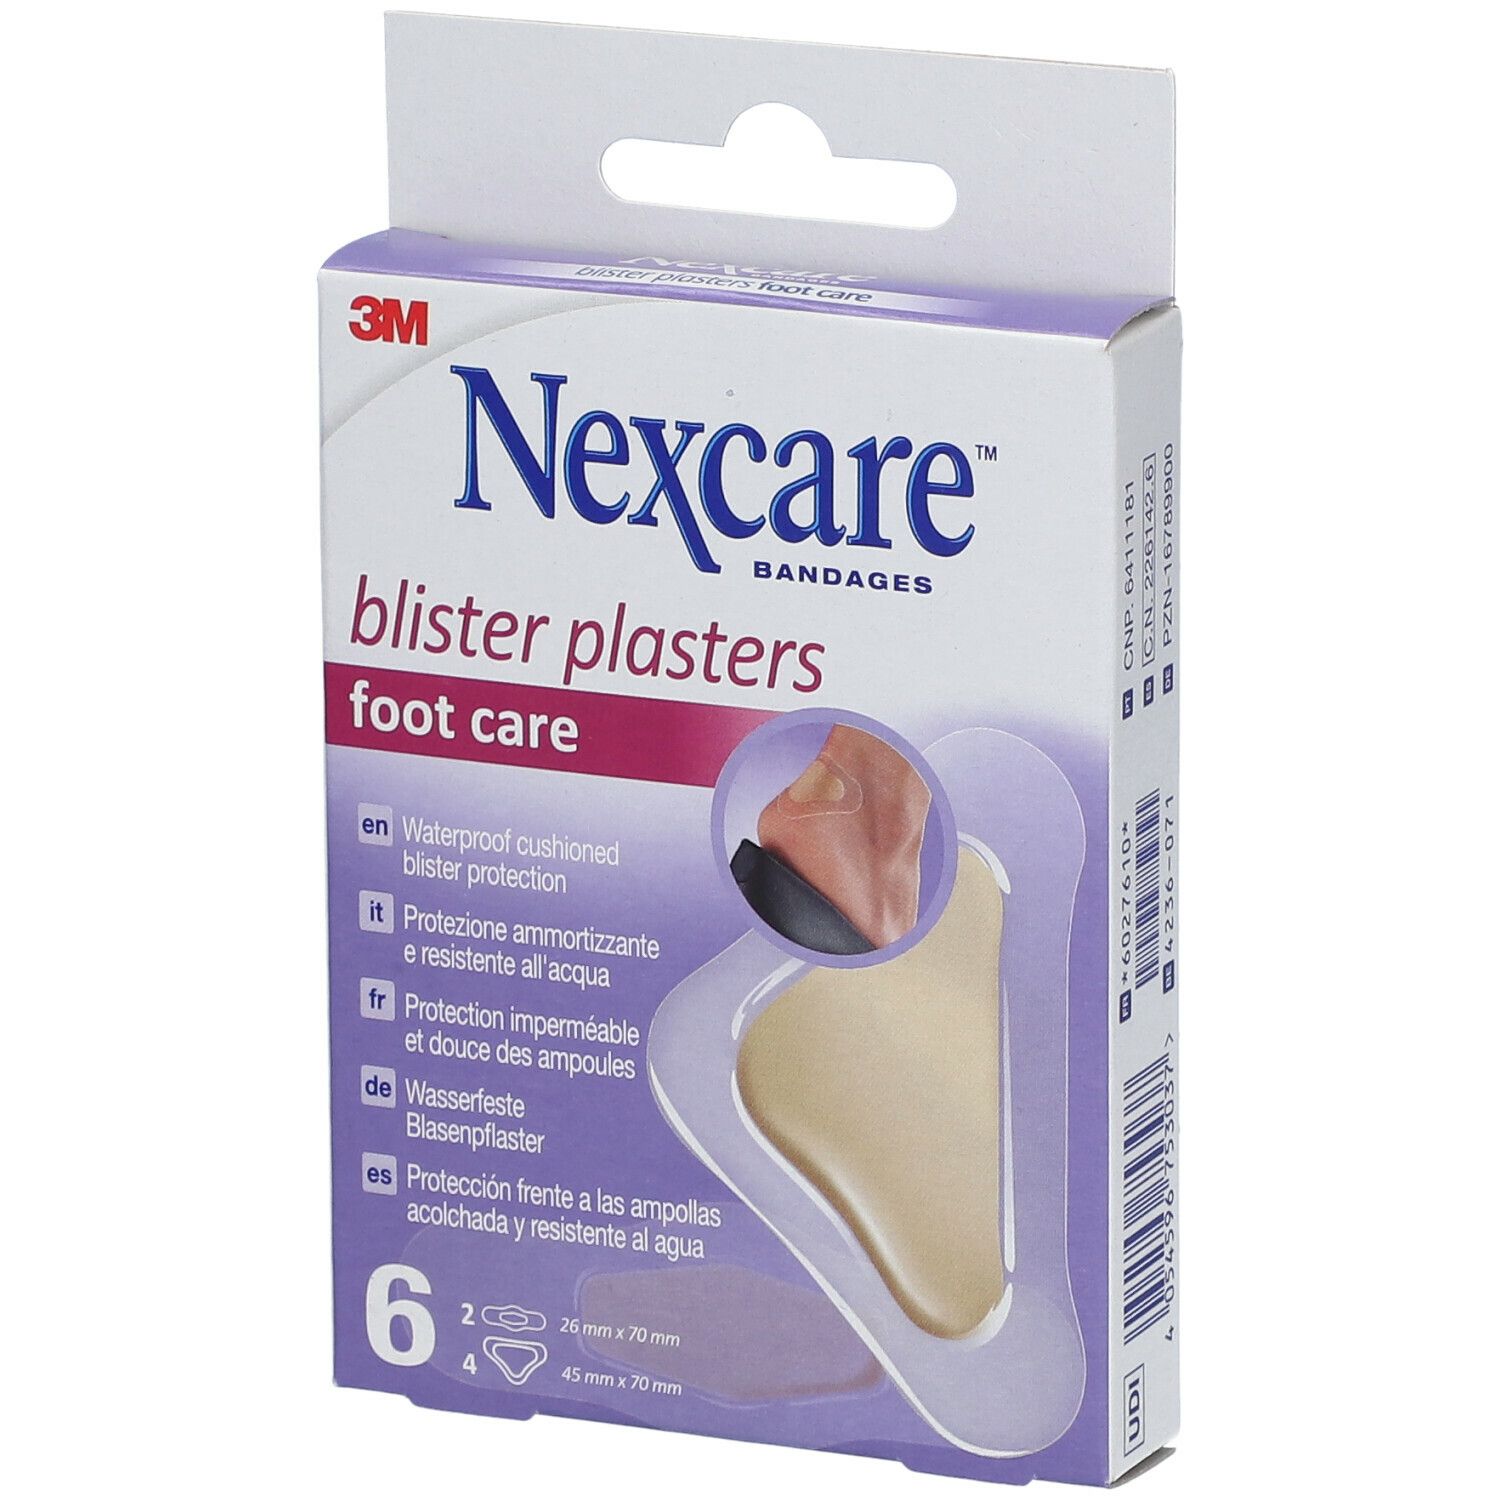 Nexcare™ blister plasters foot care